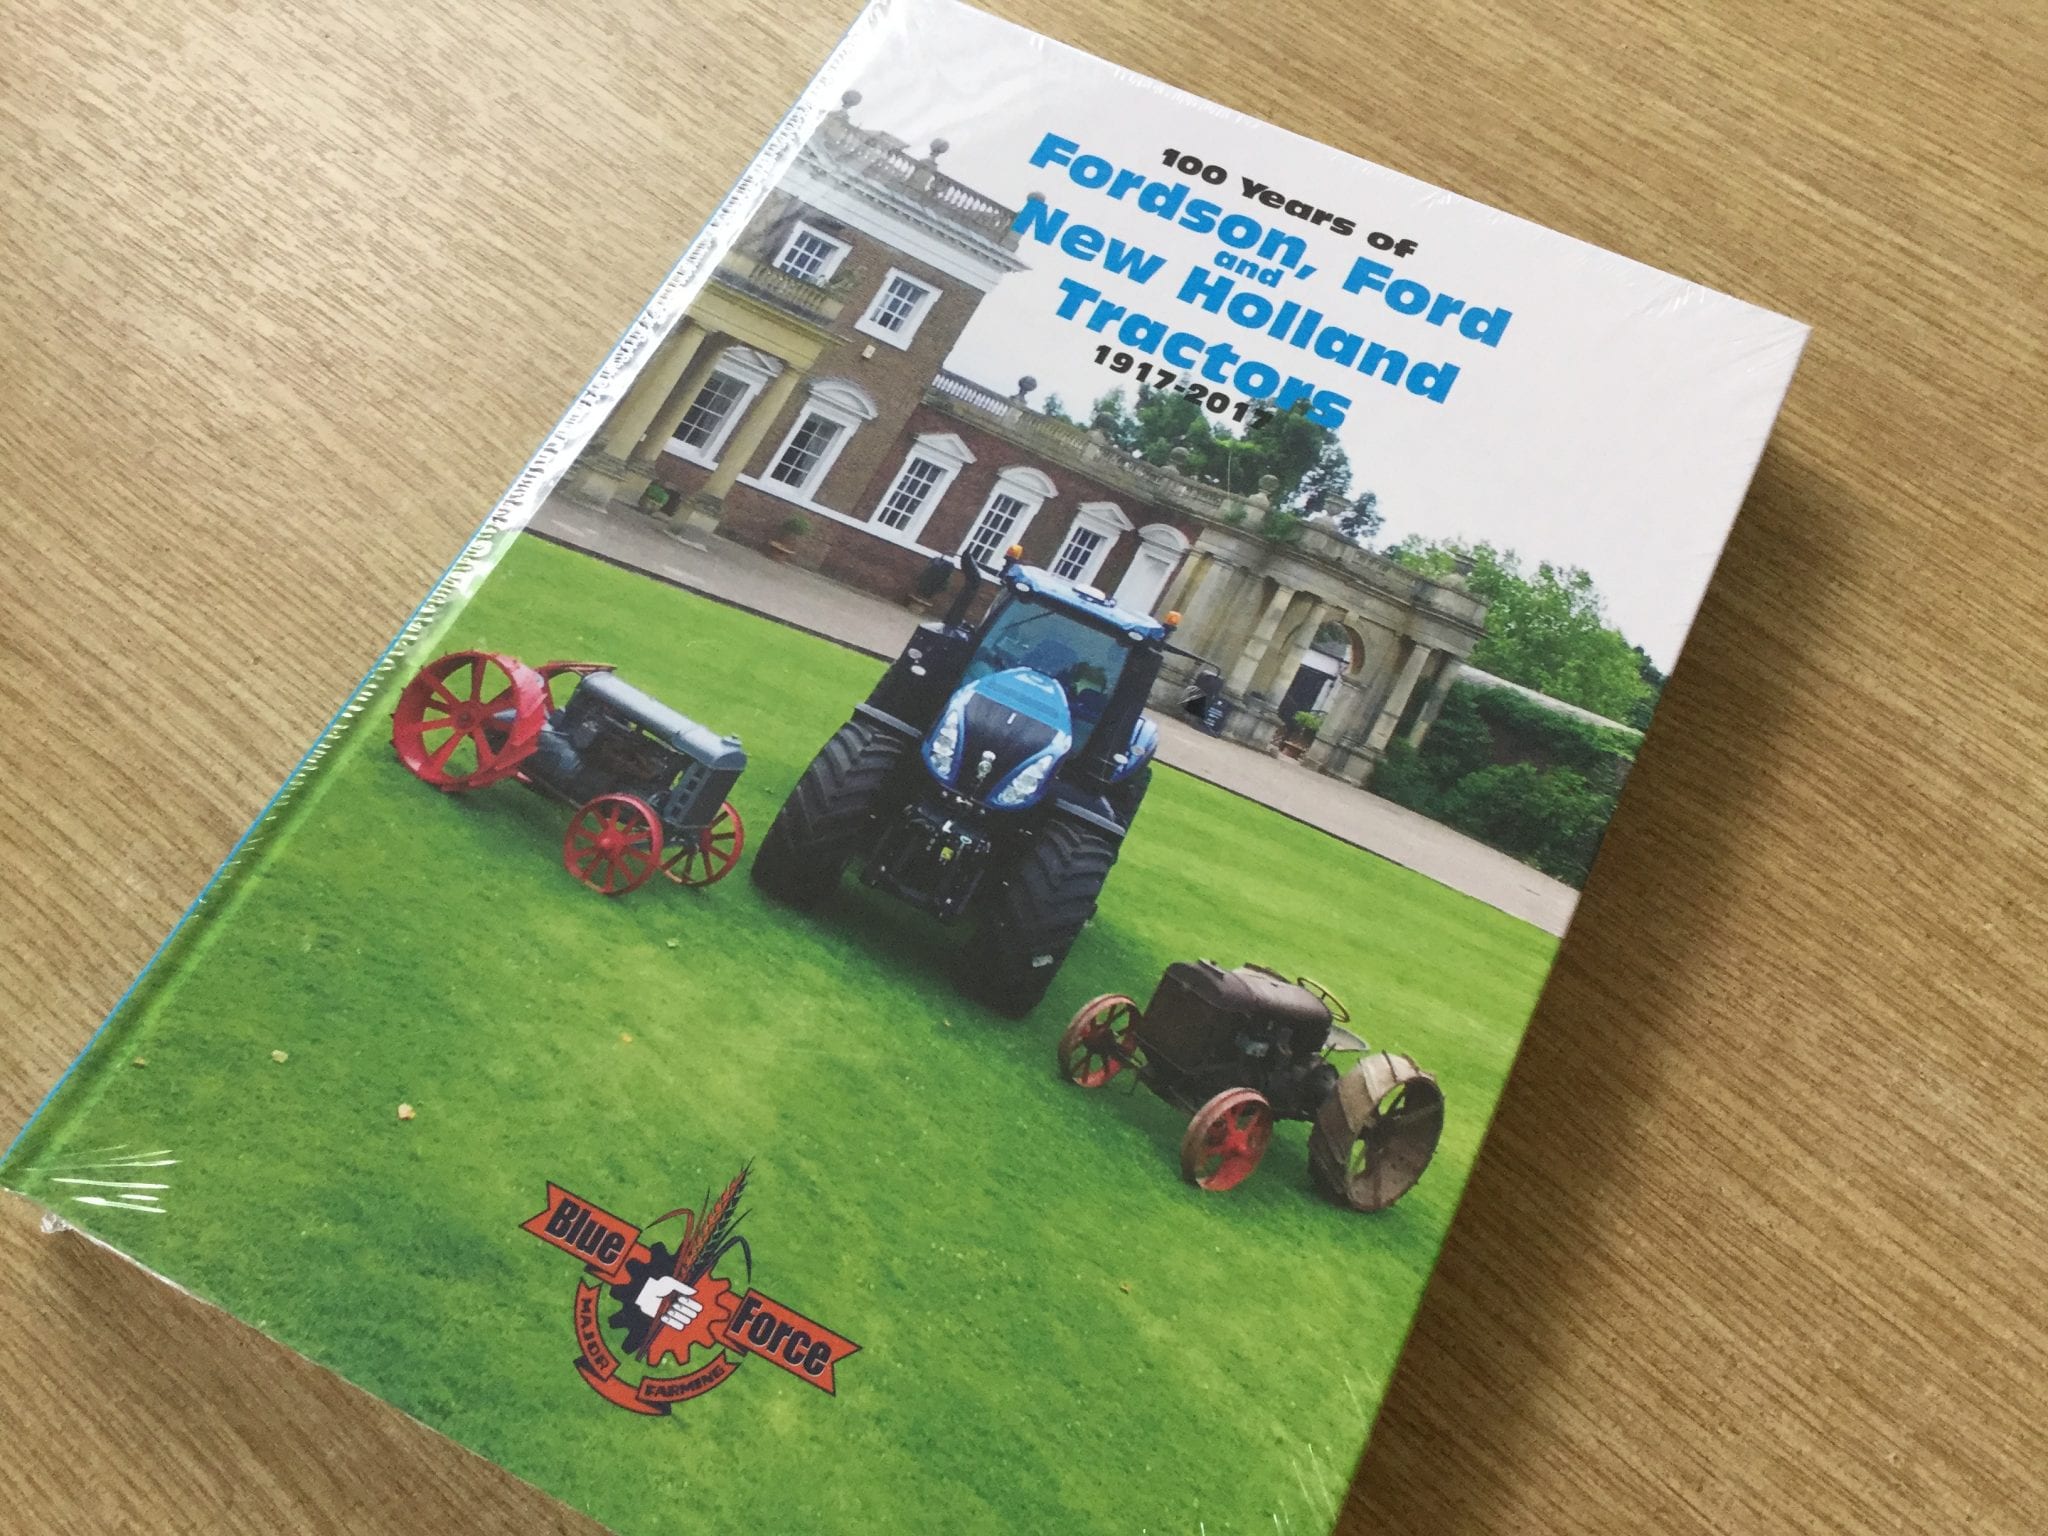 100 years of Fordson, Ford and New Holland book